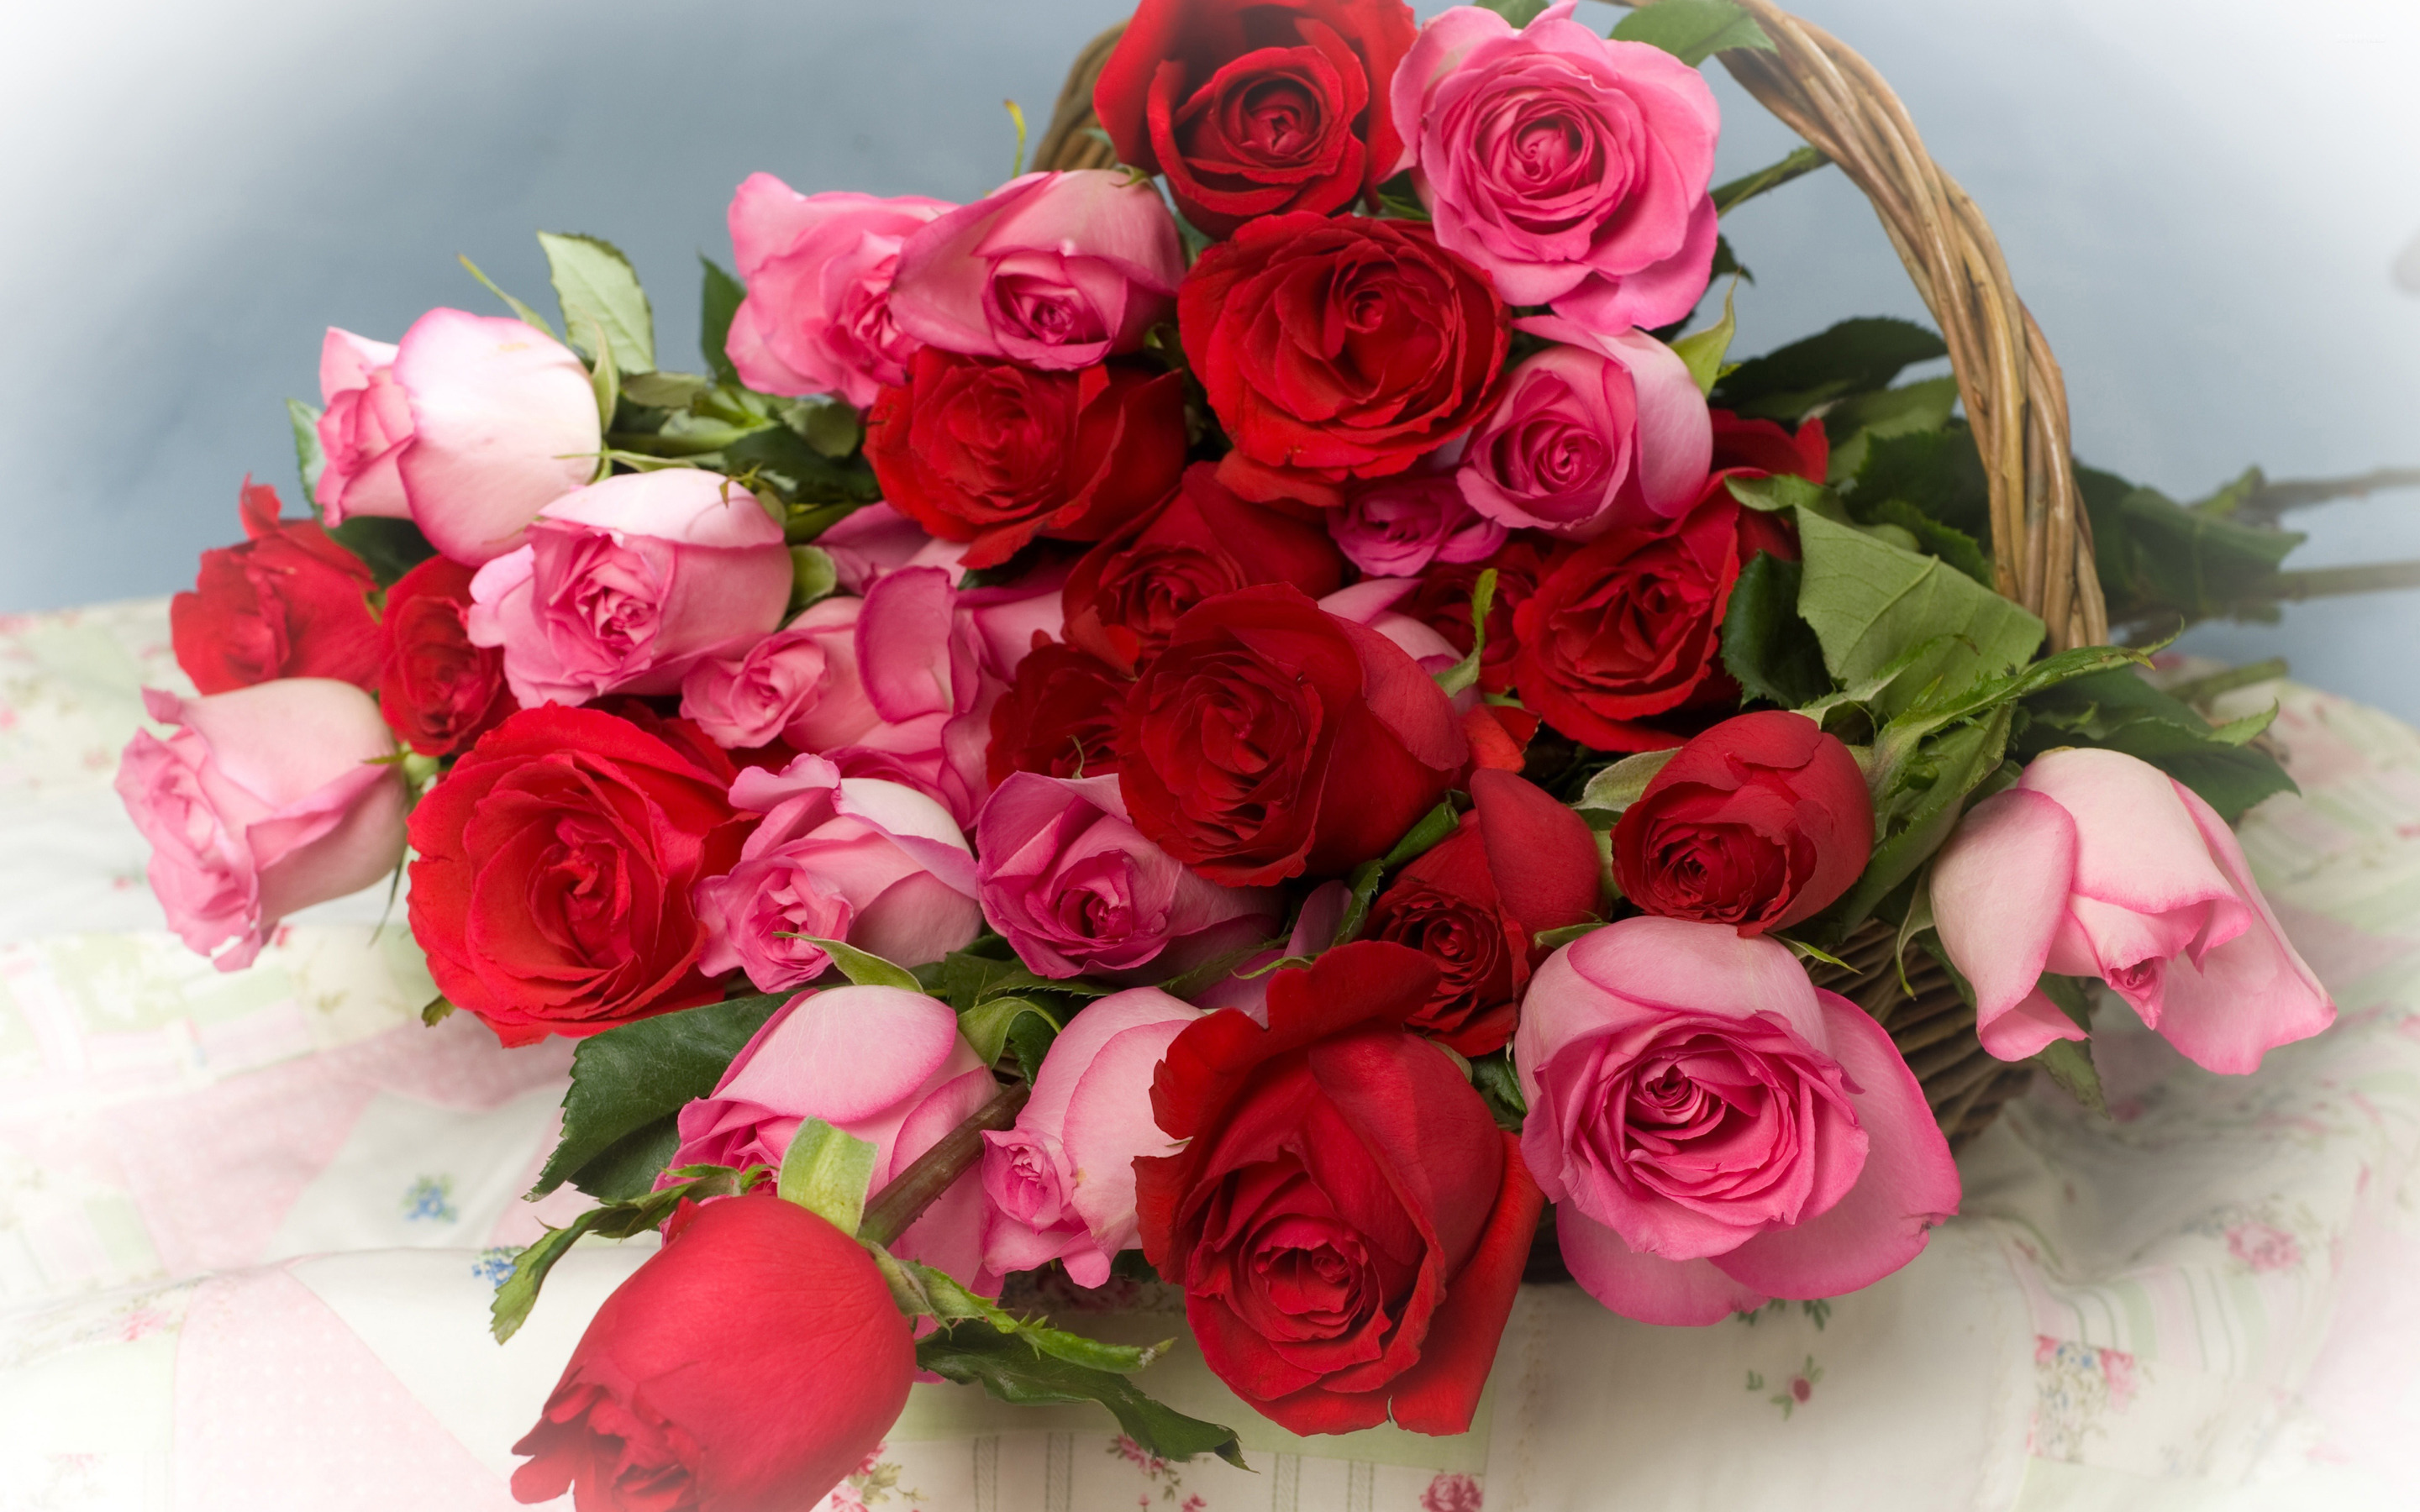 Pink and red roses in a basket wallpaper wallpaper